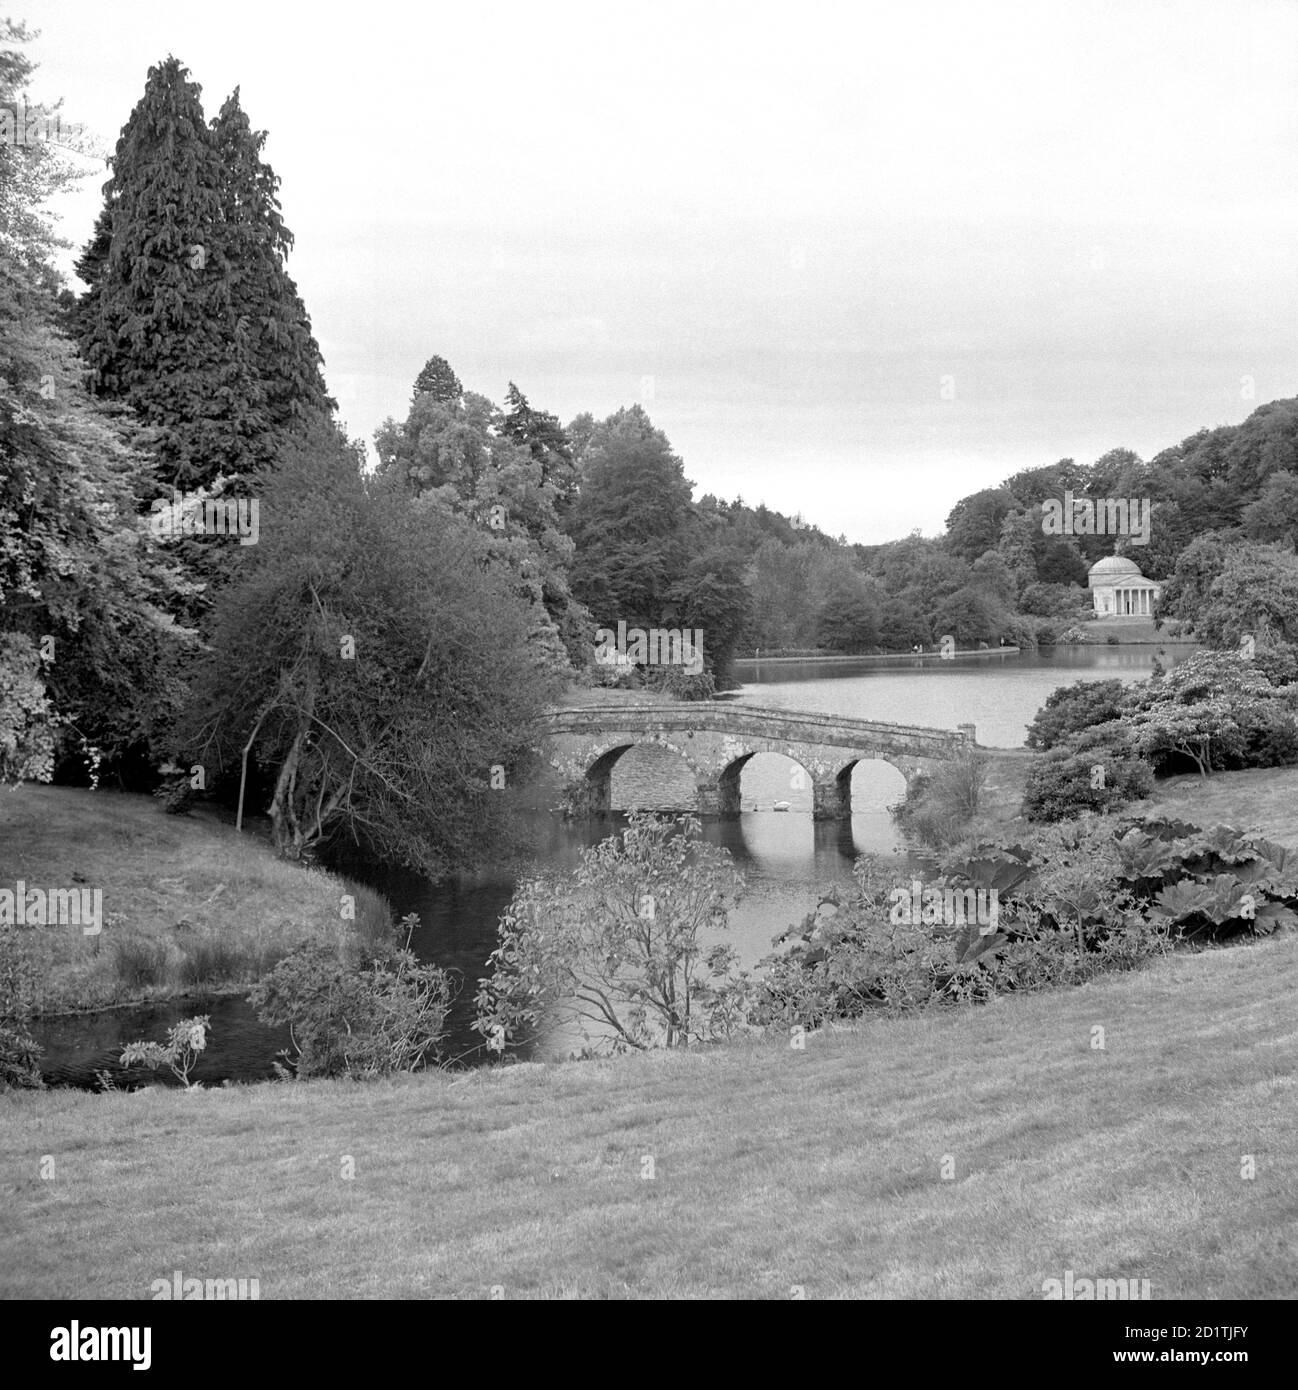 STOURHEAD PARK, Stourton, Wiltshire. The picturesque Stourhead Park was created by Henry Hoare II and laid out between 1741-80. The valley was dammed to create a sheet of water. The Palladian Bridge (1762) and the Pantheon (1754) are just two of the garden structures which provided a focus for dramatic views. Photographed by Eric de Mare between 1945 and 1980. Stock Photo